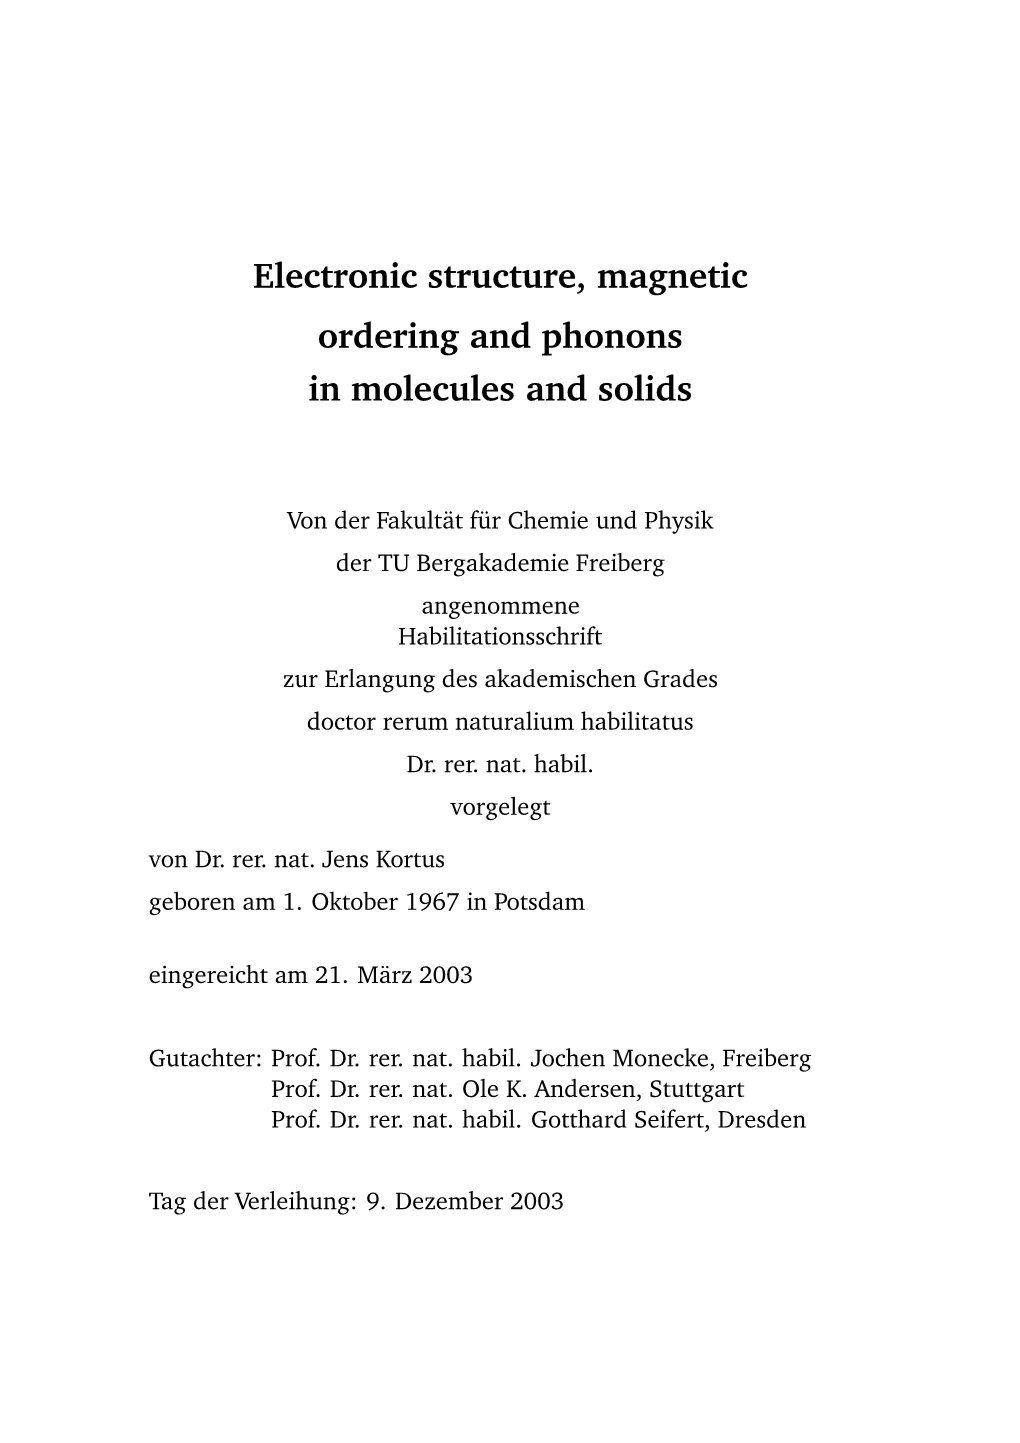 Electronic Structure, Magnetic Ordering and Phonons in Molecules and Solids